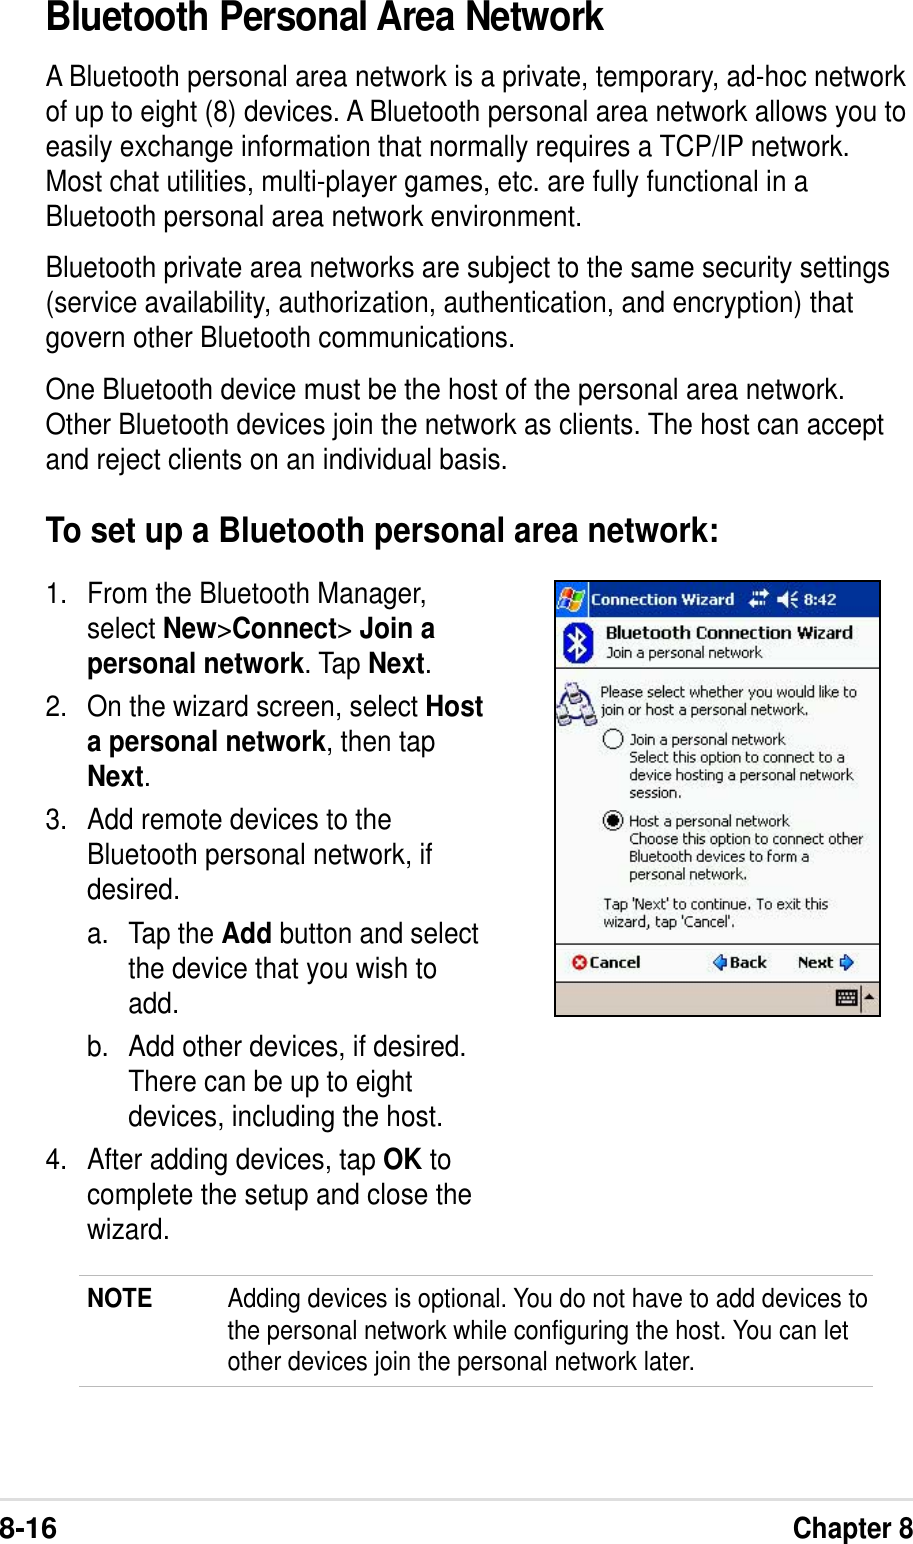 8-16Chapter 8Bluetooth Personal Area NetworkA Bluetooth personal area network is a private, temporary, ad-hoc networkof up to eight (8) devices. A Bluetooth personal area network allows you toeasily exchange information that normally requires a TCP/IP network.Most chat utilities, multi-player games, etc. are fully functional in aBluetooth personal area network environment.Bluetooth private area networks are subject to the same security settings(service availability, authorization, authentication, and encryption) thatgovern other Bluetooth communications.One Bluetooth device must be the host of the personal area network.Other Bluetooth devices join the network as clients. The host can acceptand reject clients on an individual basis.To set up a Bluetooth personal area network:1. From the Bluetooth Manager,select New&gt;Connect&gt; Join apersonal network. Tap Next.2. On the wizard screen, select Hosta personal network, then tapNext.3. Add remote devices to theBluetooth personal network, ifdesired.a. Tap the Add button and selectthe device that you wish toadd.b. Add other devices, if desired.There can be up to eightdevices, including the host.4. After adding devices, tap OK tocomplete the setup and close thewizard.NOTE Adding devices is optional. You do not have to add devices tothe personal network while configuring the host. You can letother devices join the personal network later.